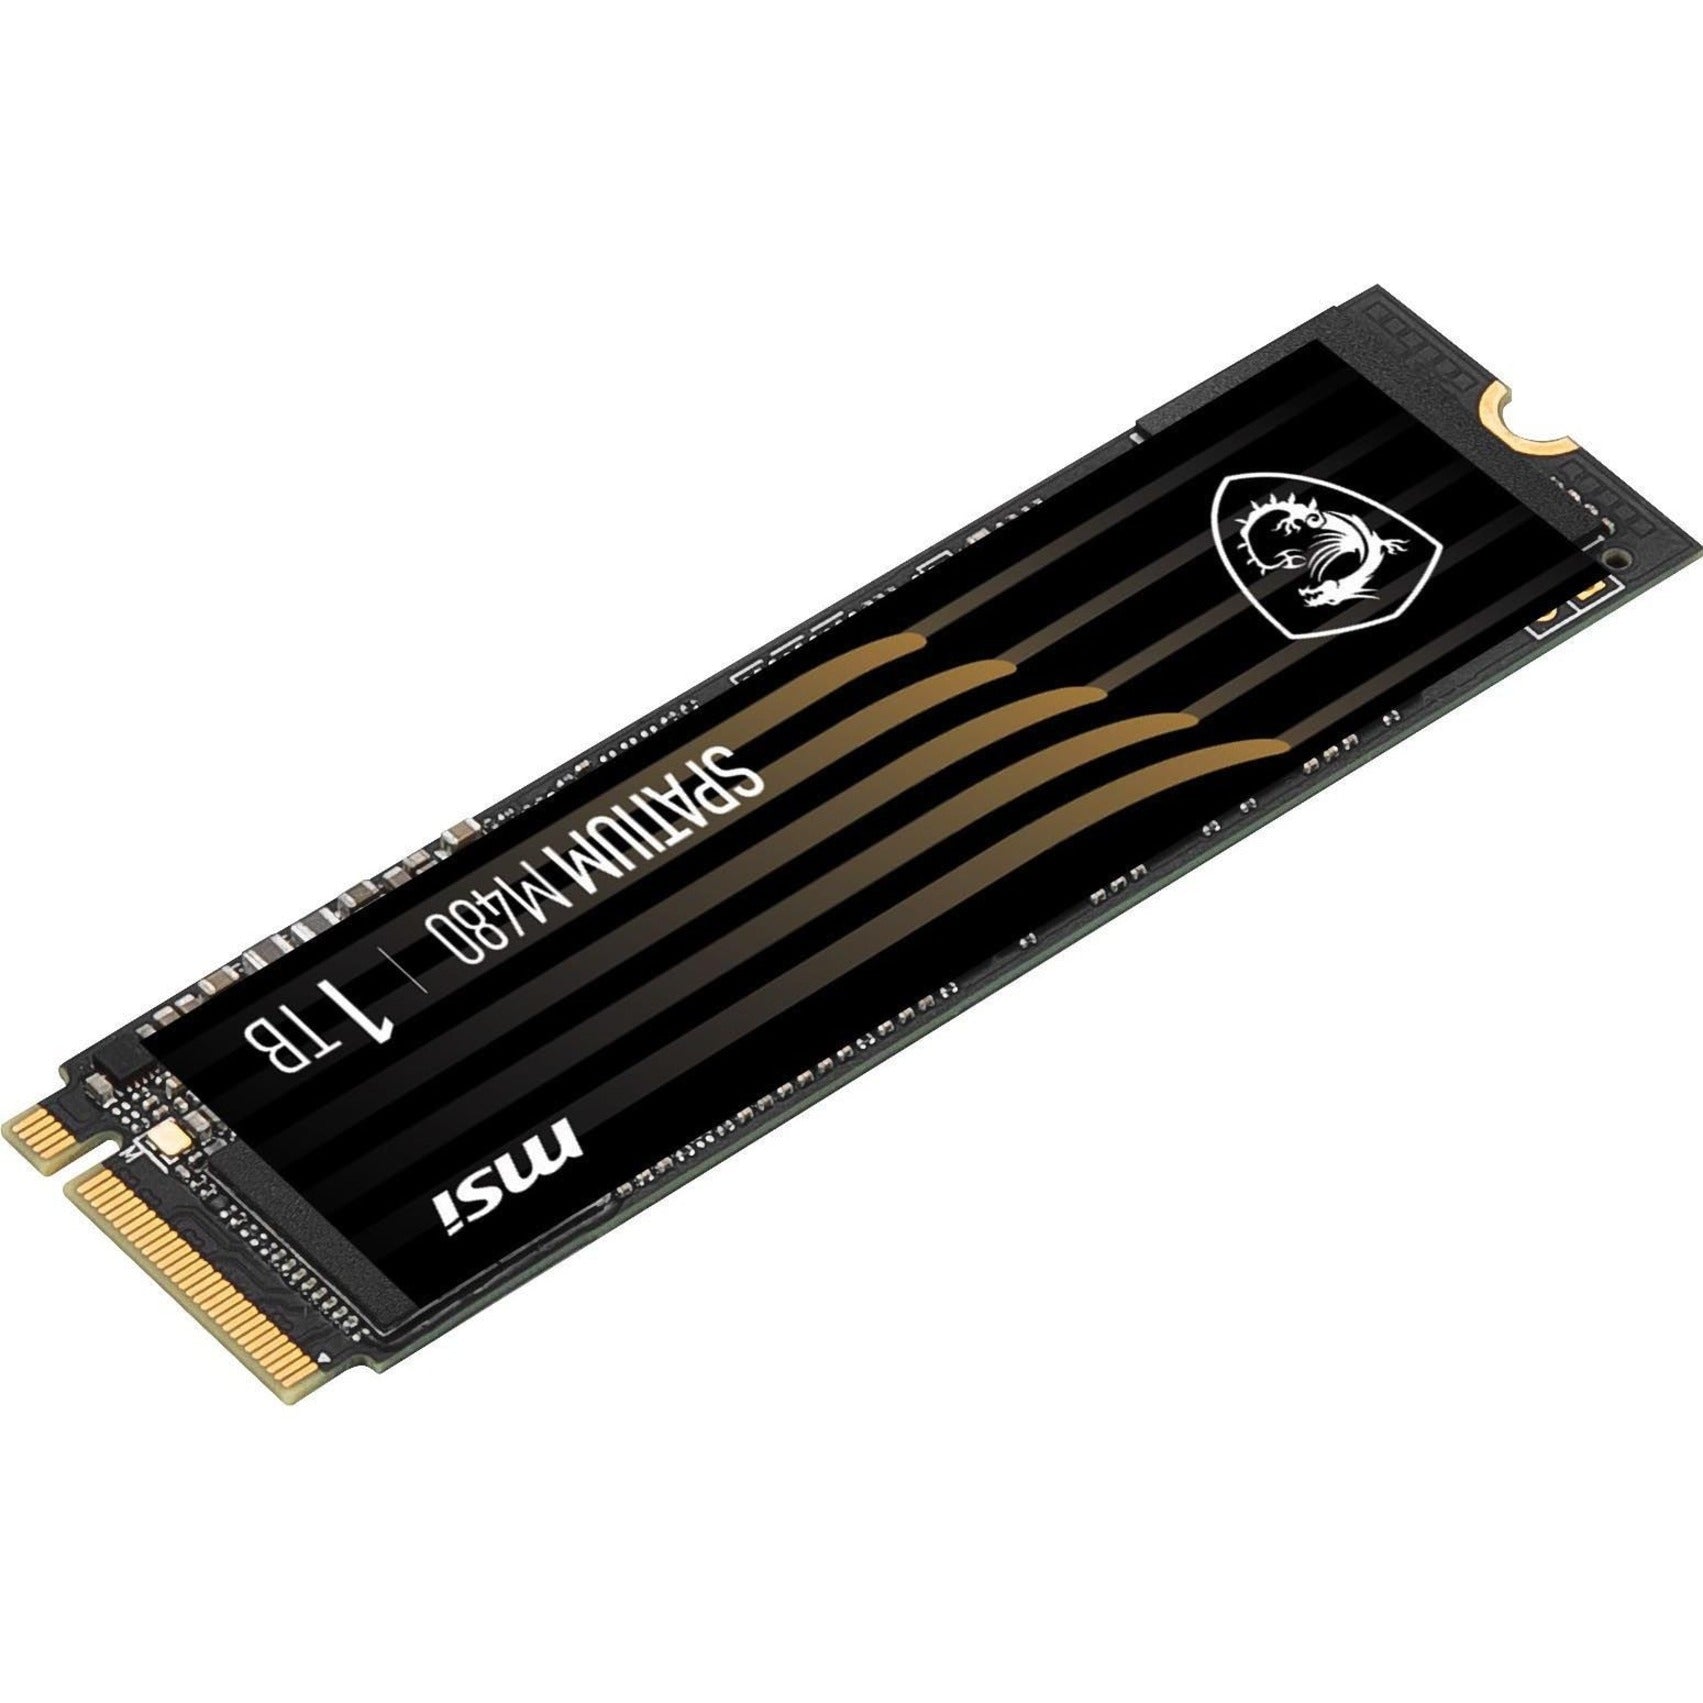 MSI SM480N1TBP SPATIUM M480 1 TB Solid State Drive, High-Speed PCIe NVMe 4.0 x4, 5-Year Warranty